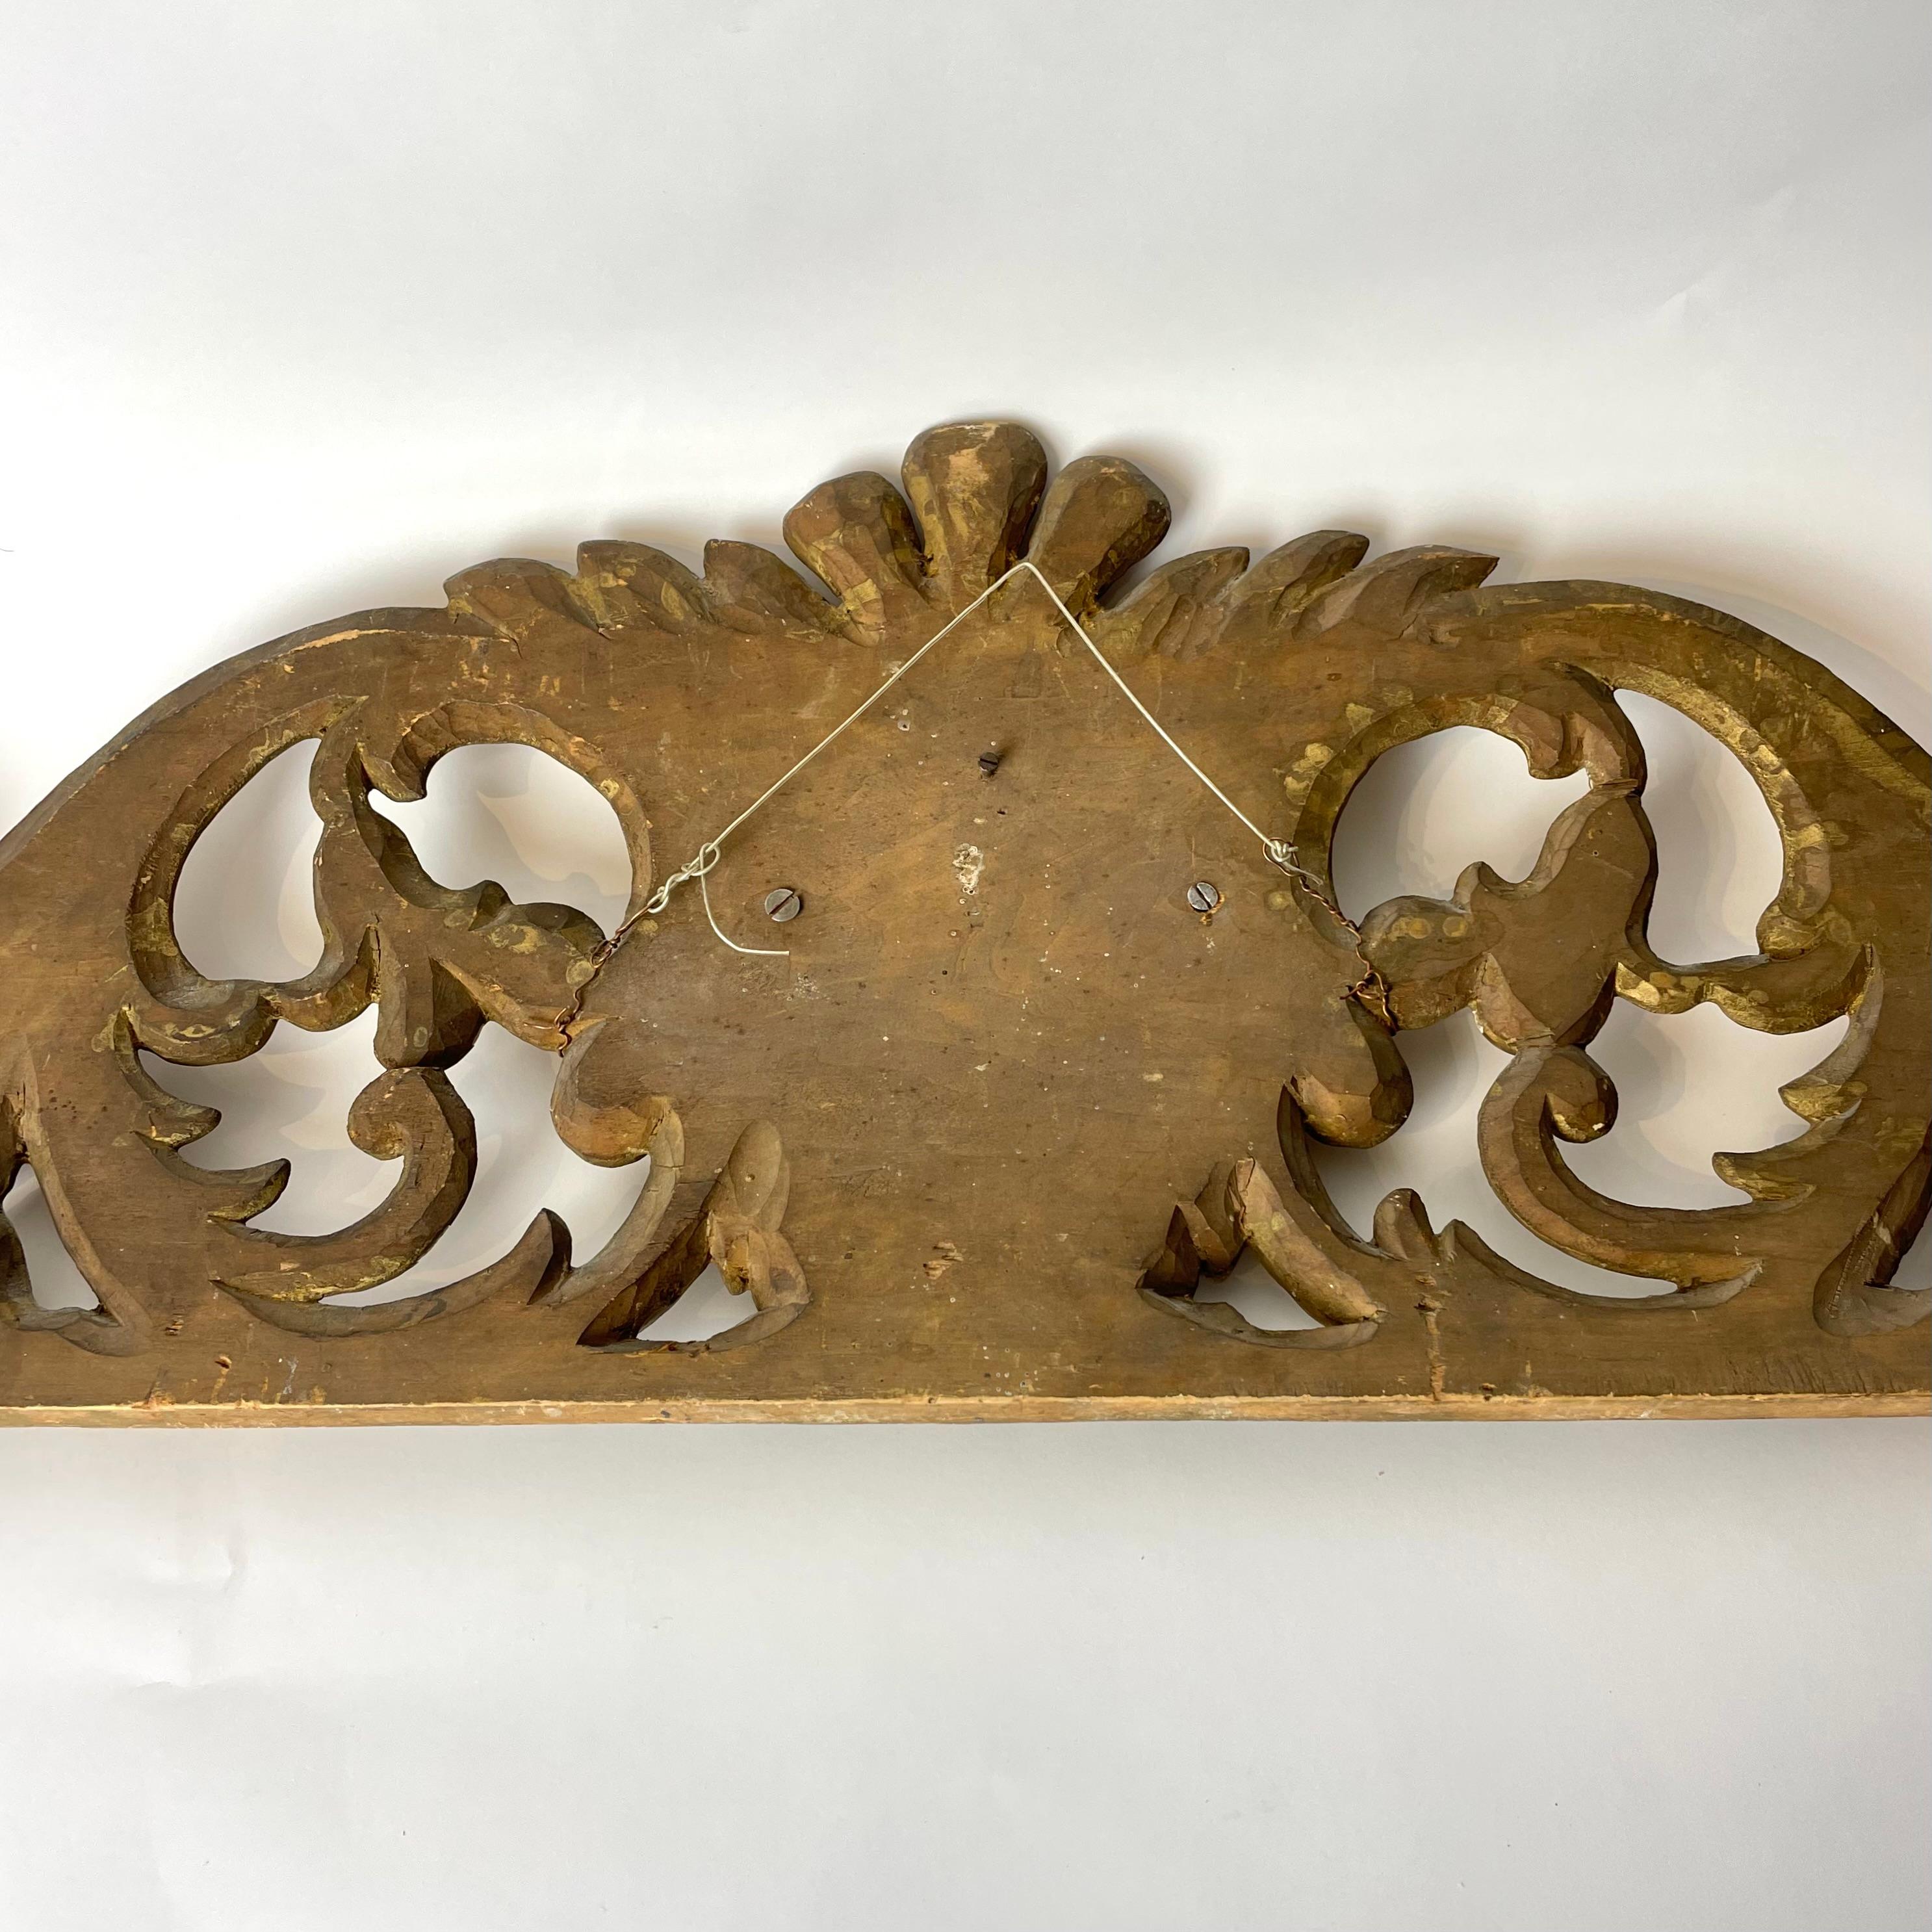 Decorative Door Moulding Architrave Gilt and Silvered Wood Panel, 18th Century For Sale 2